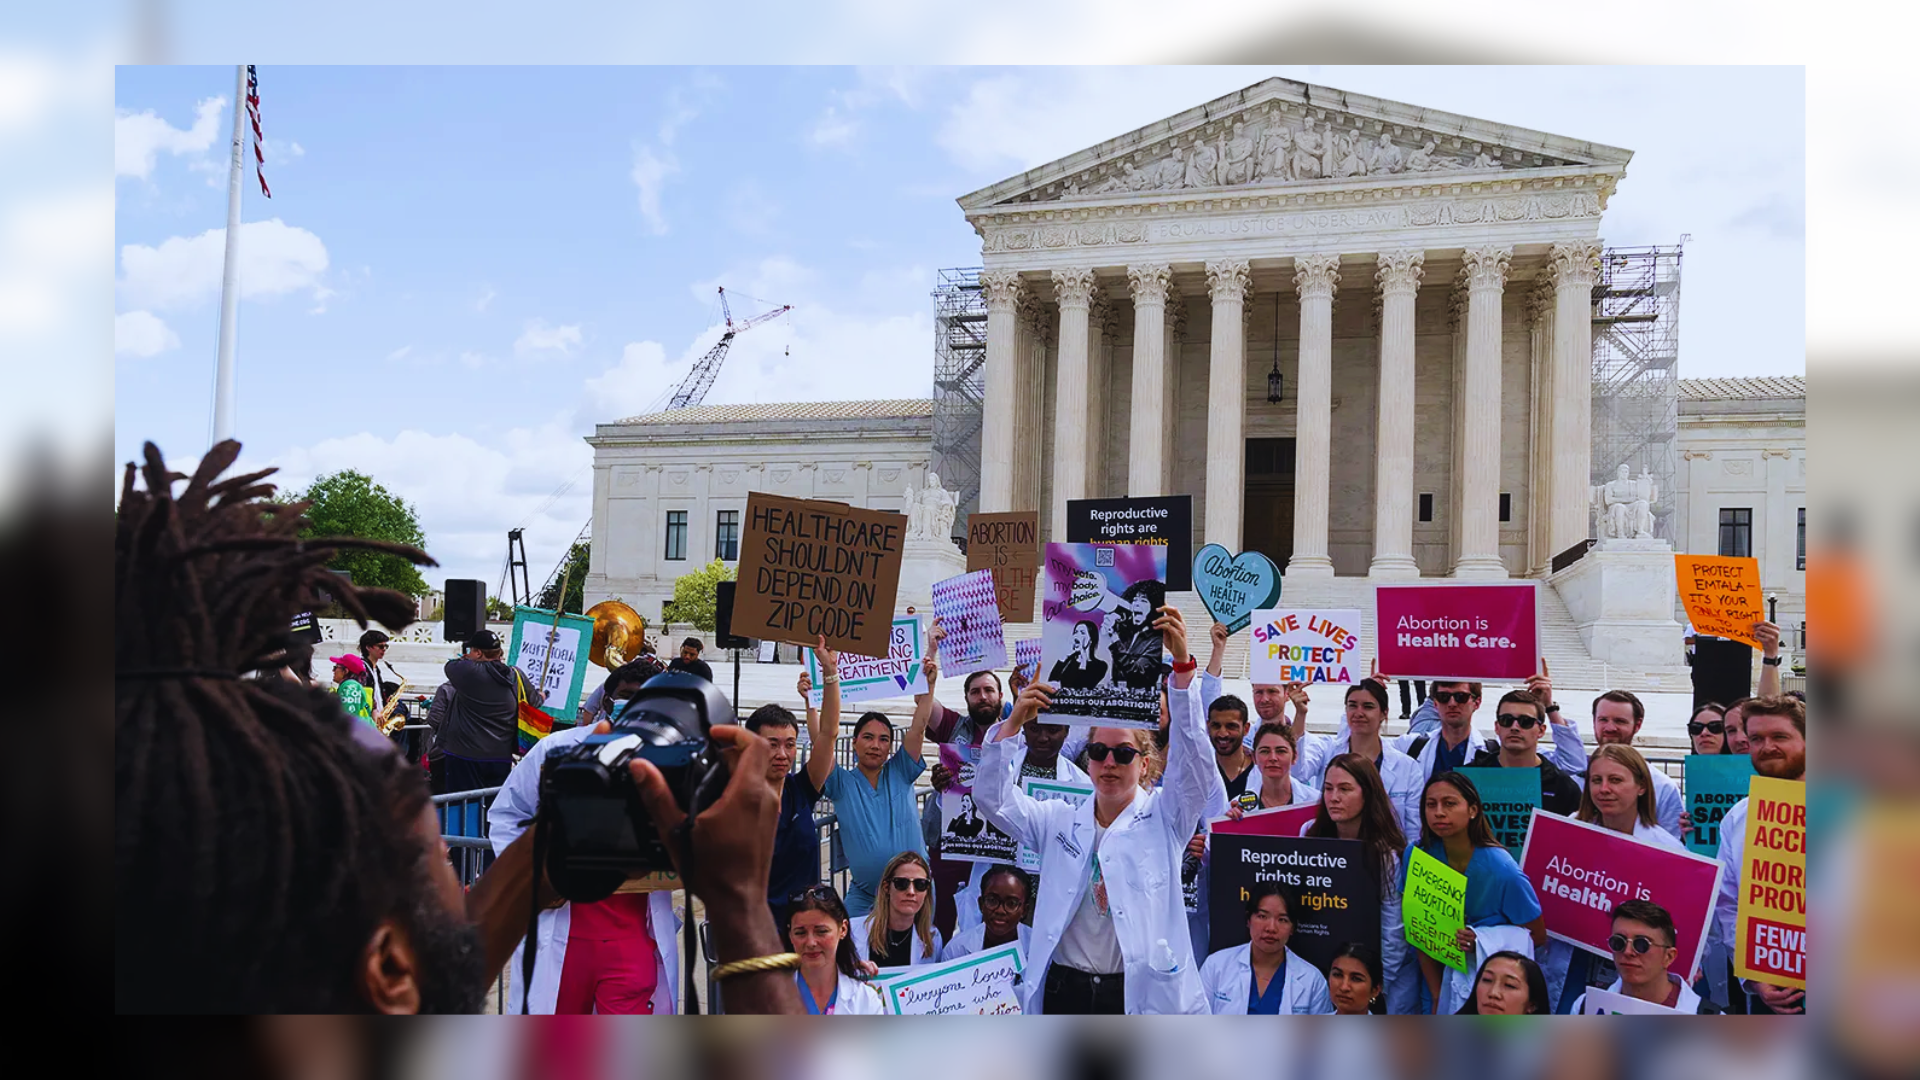 US Supreme Court Accidentally Leaks Opinion Hinting At Abortion Ruling